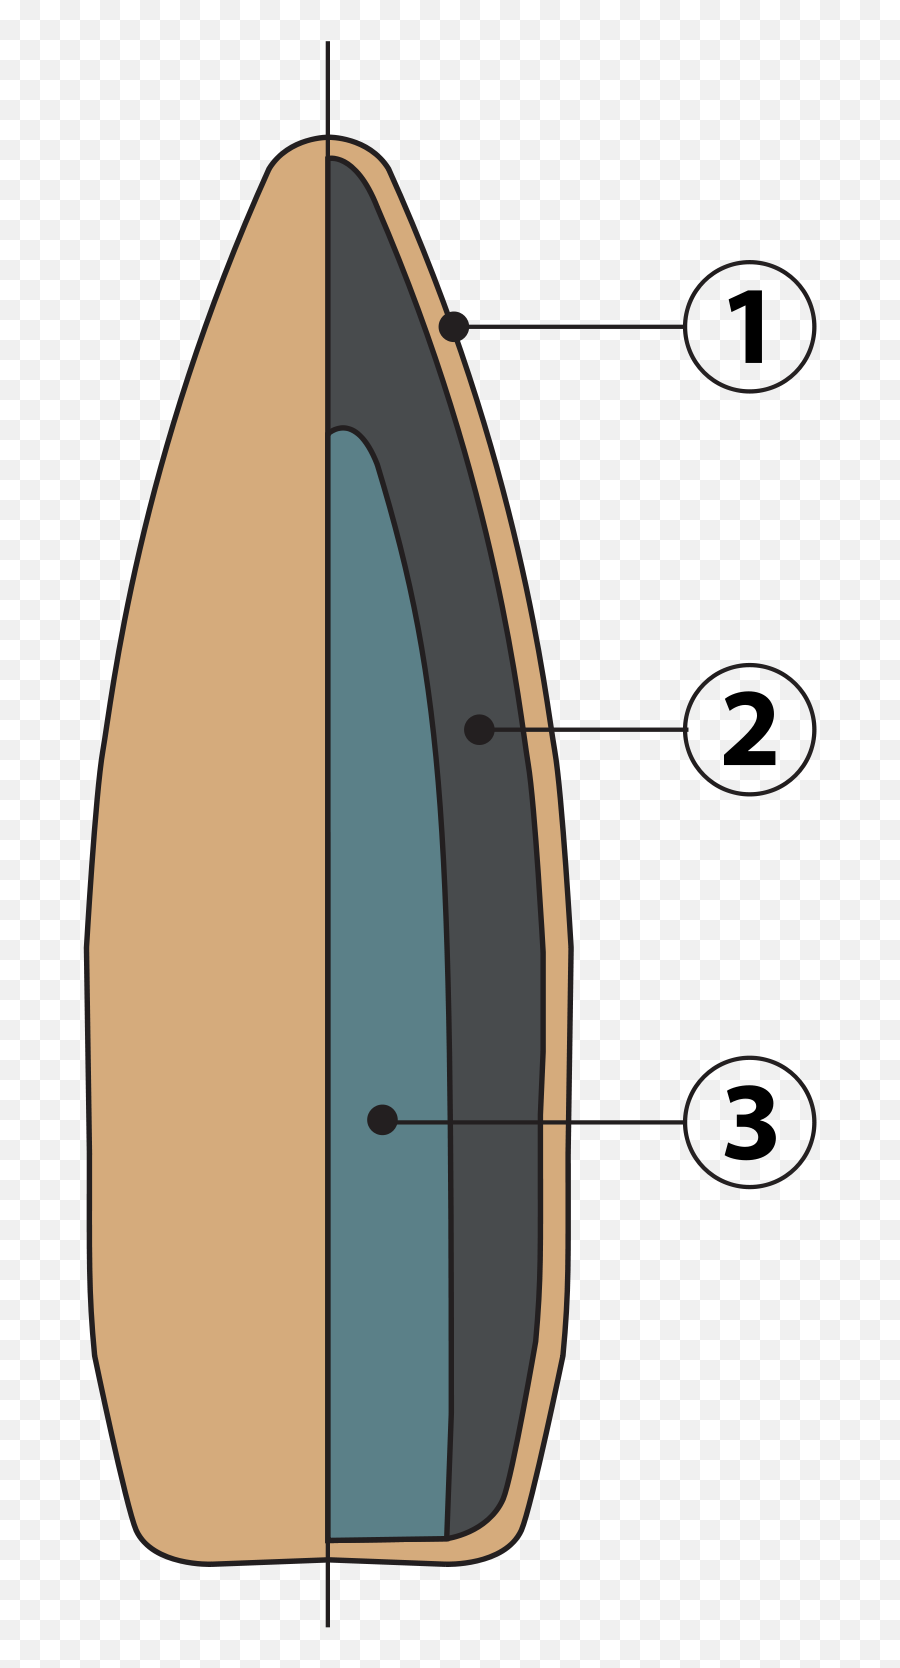 Terminal Ballistics - Wikipedia Anatomy Of A Bullet Png,Flying Bullet Png